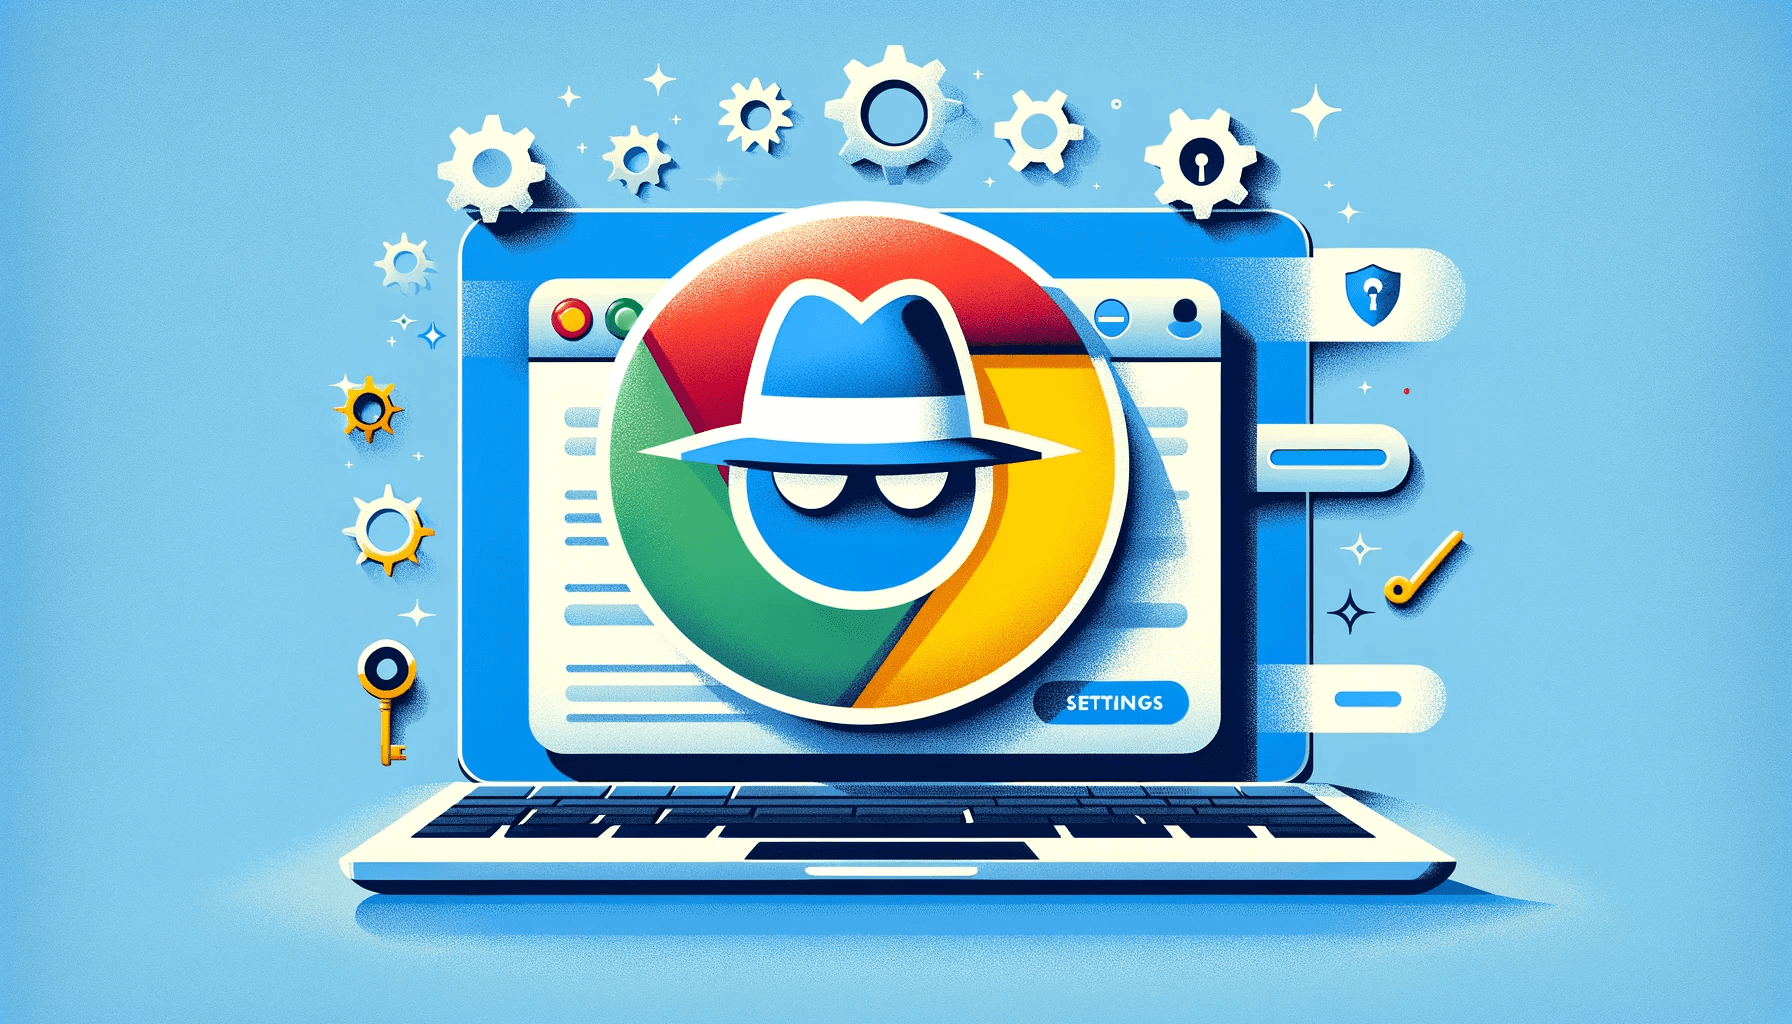 Chrome Control: How to Turn Off Incognito Mode in Chrome